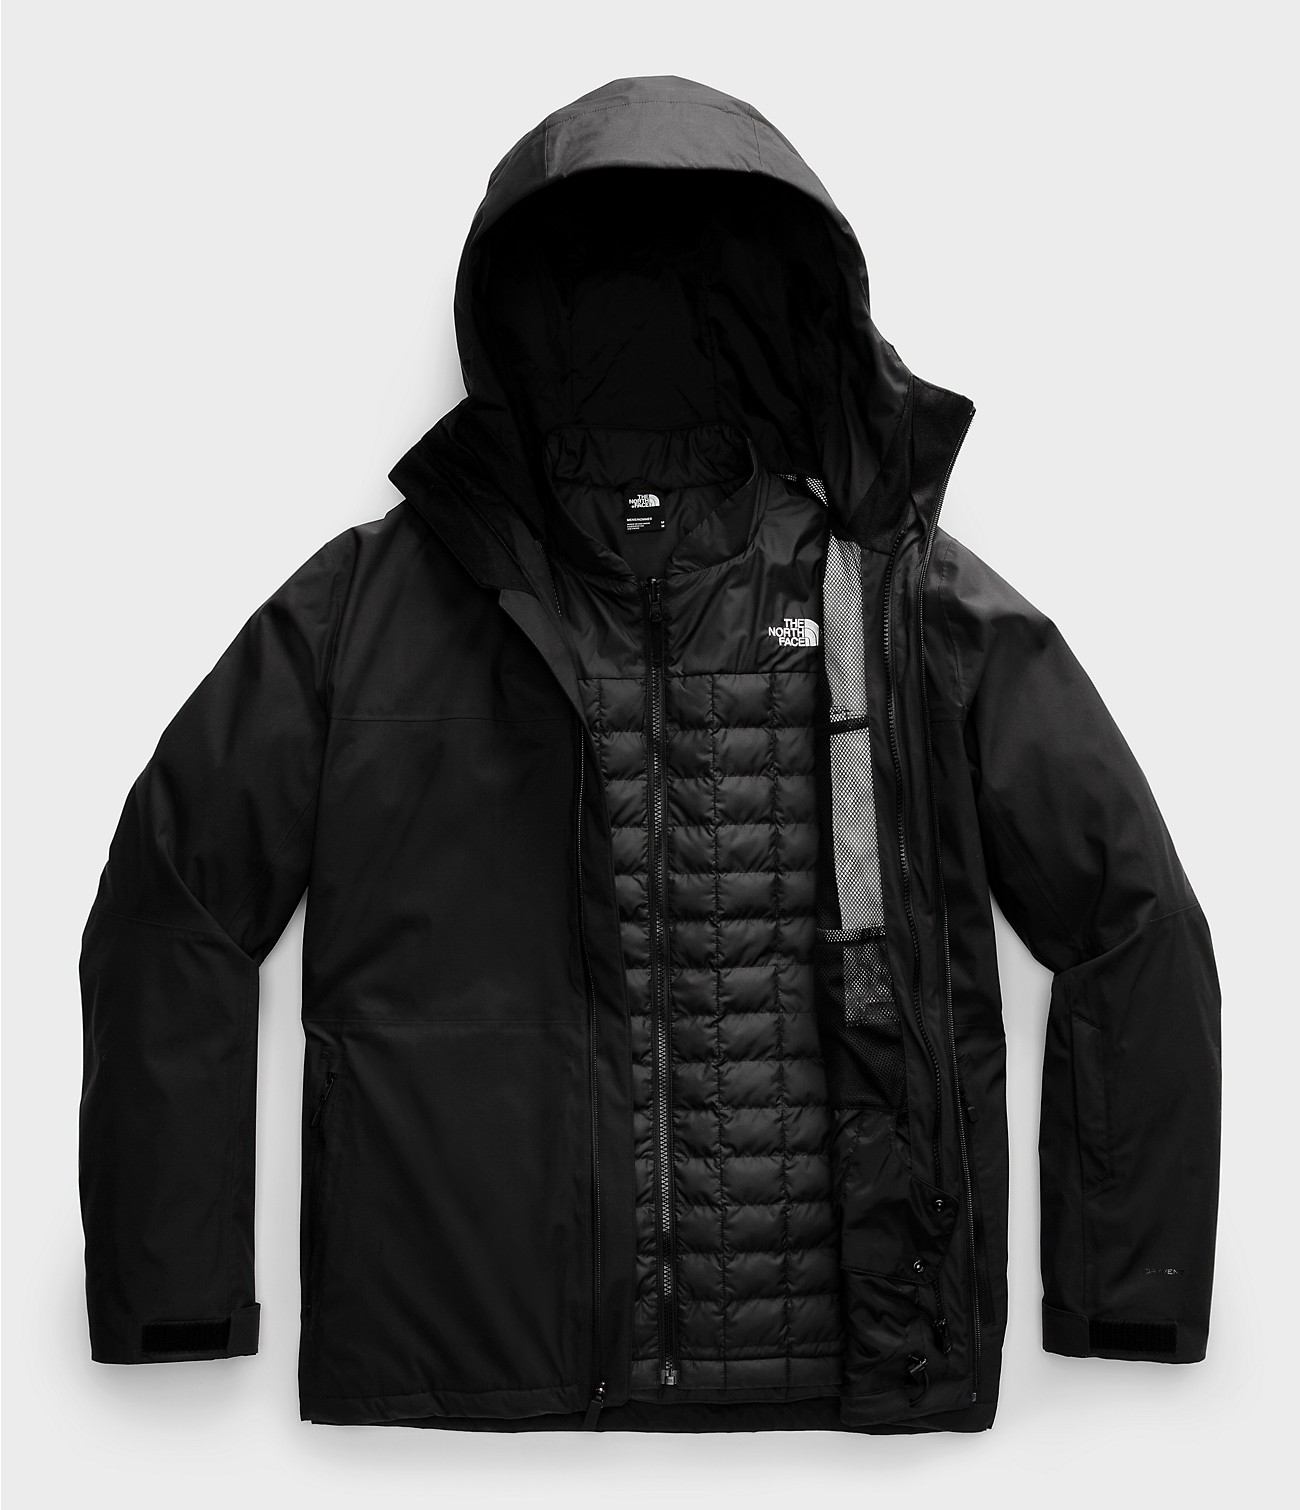 Unlock Wilderness' choice in the North Face Vs Mammut comparison, the ThermoBall™ Eco Snow Triclimate® Jacket by The North Face